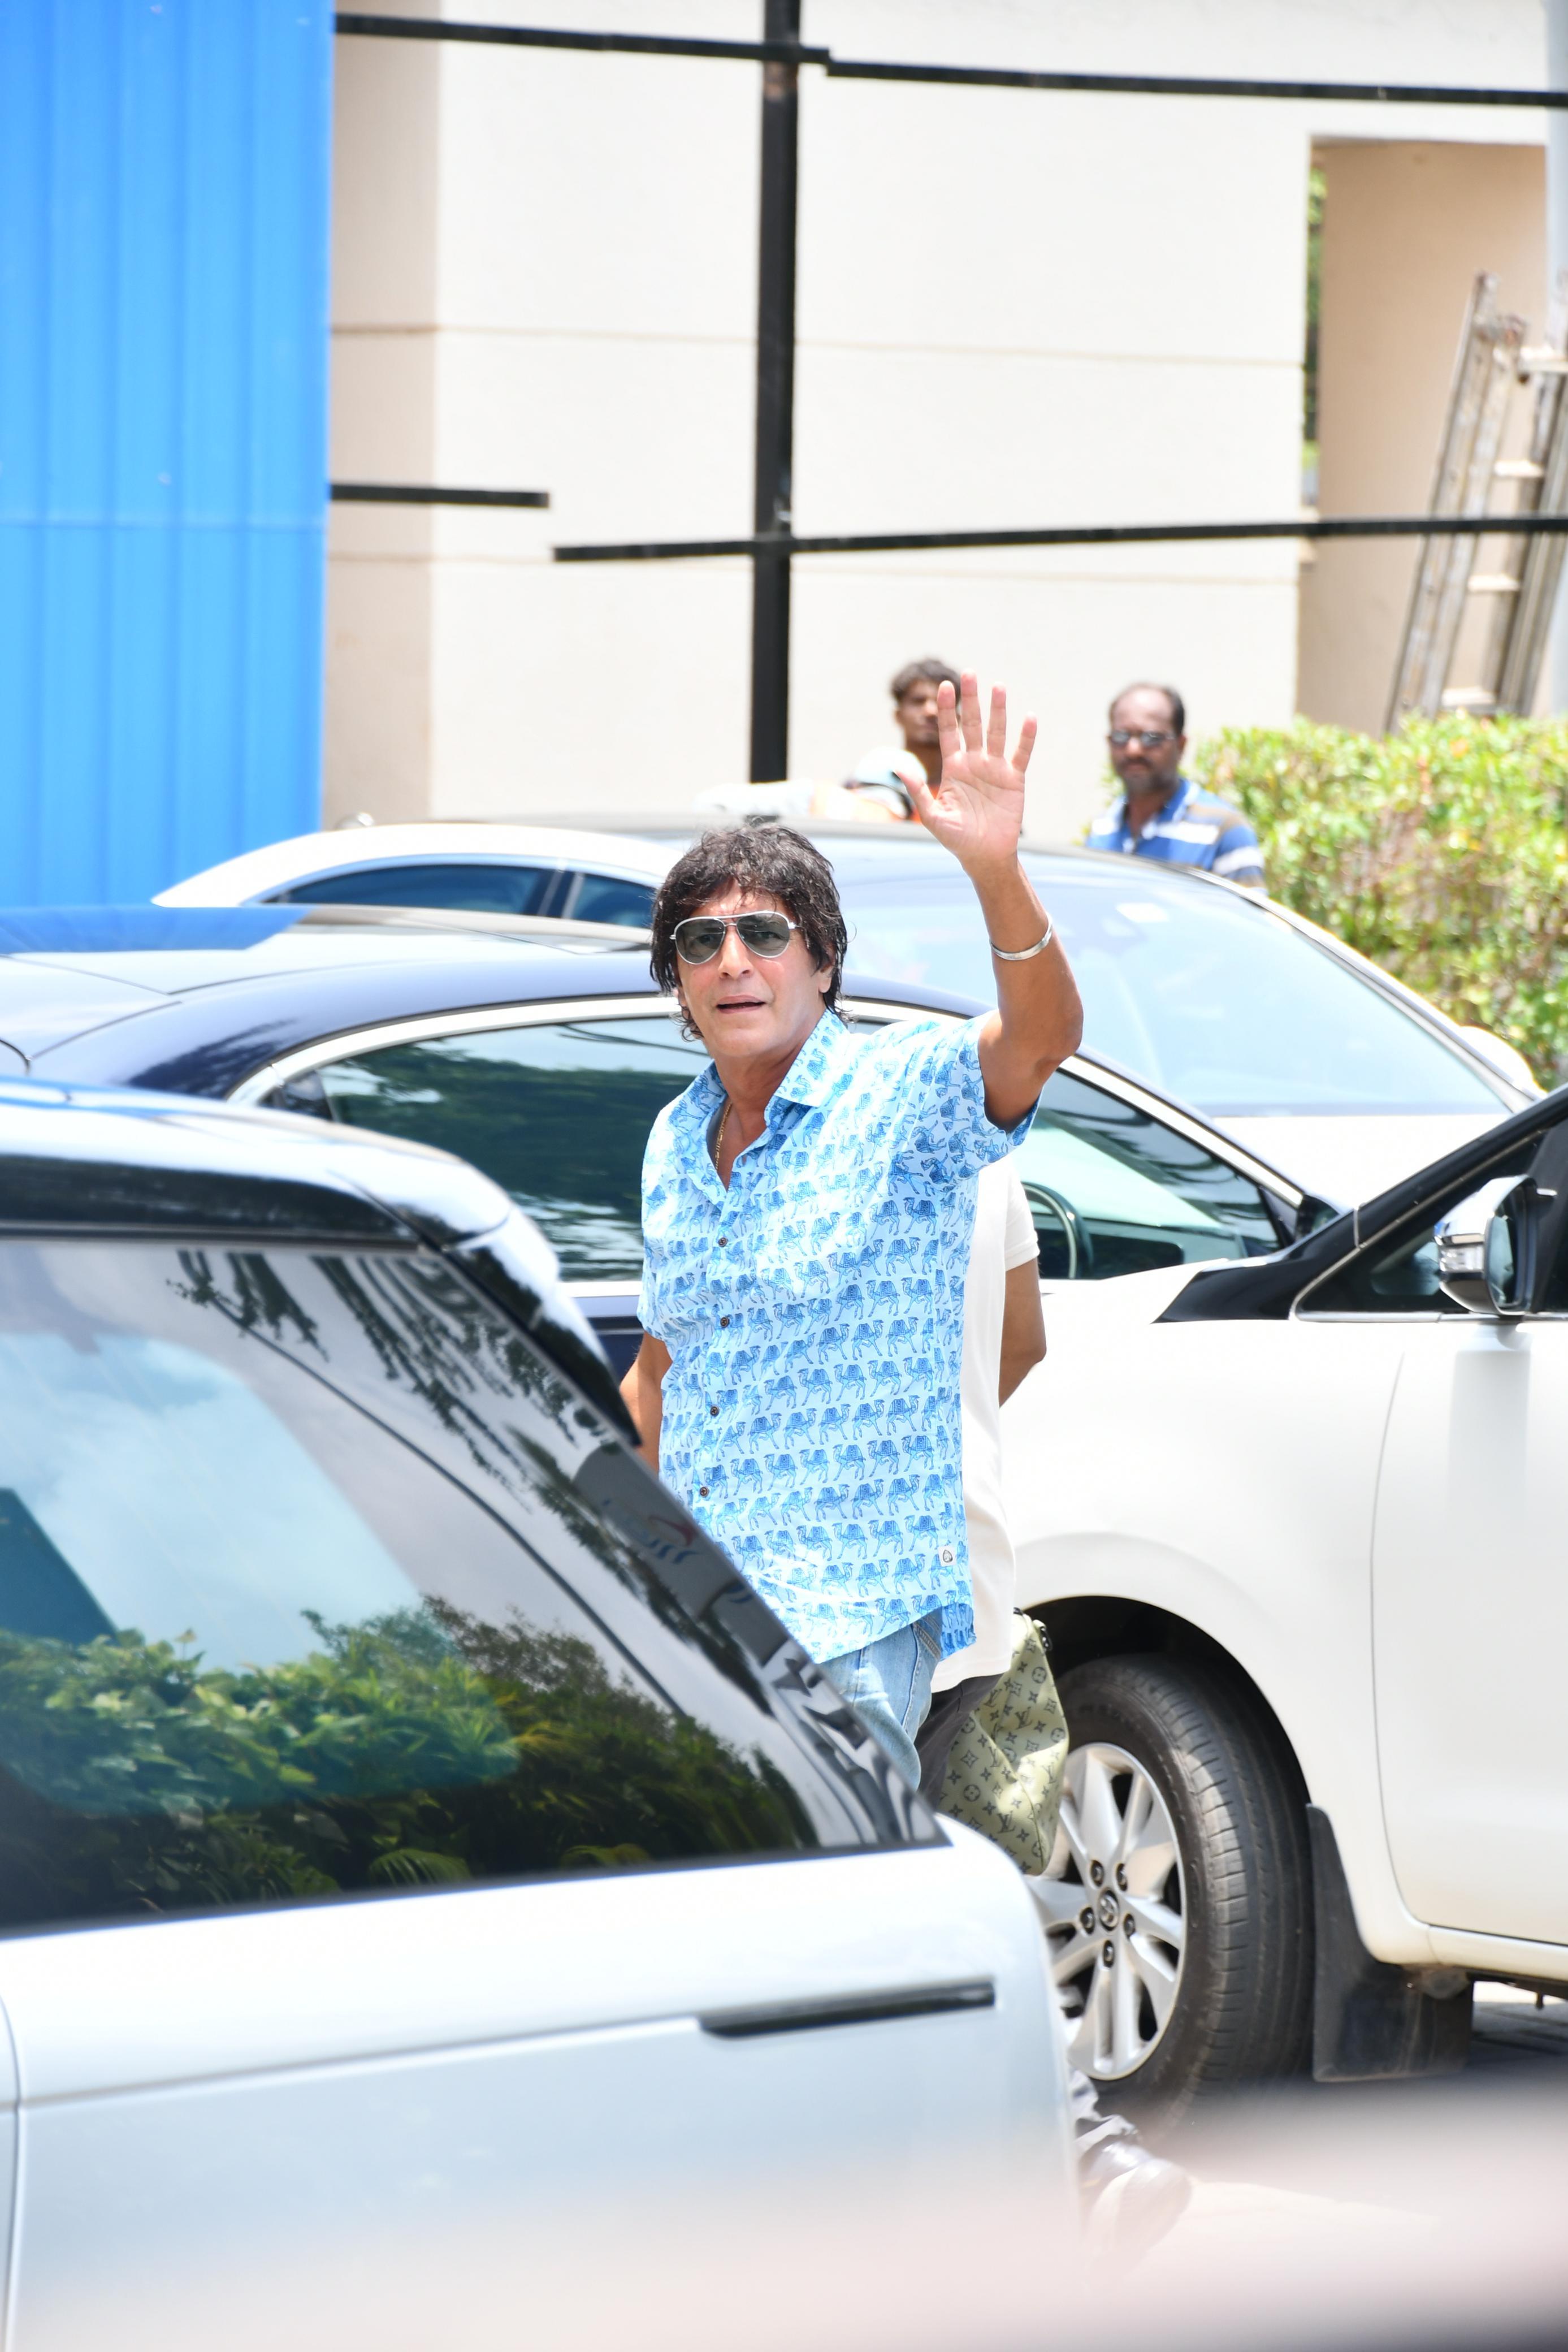 Chunky Panday was snapped at the airport as he jetted off from the city